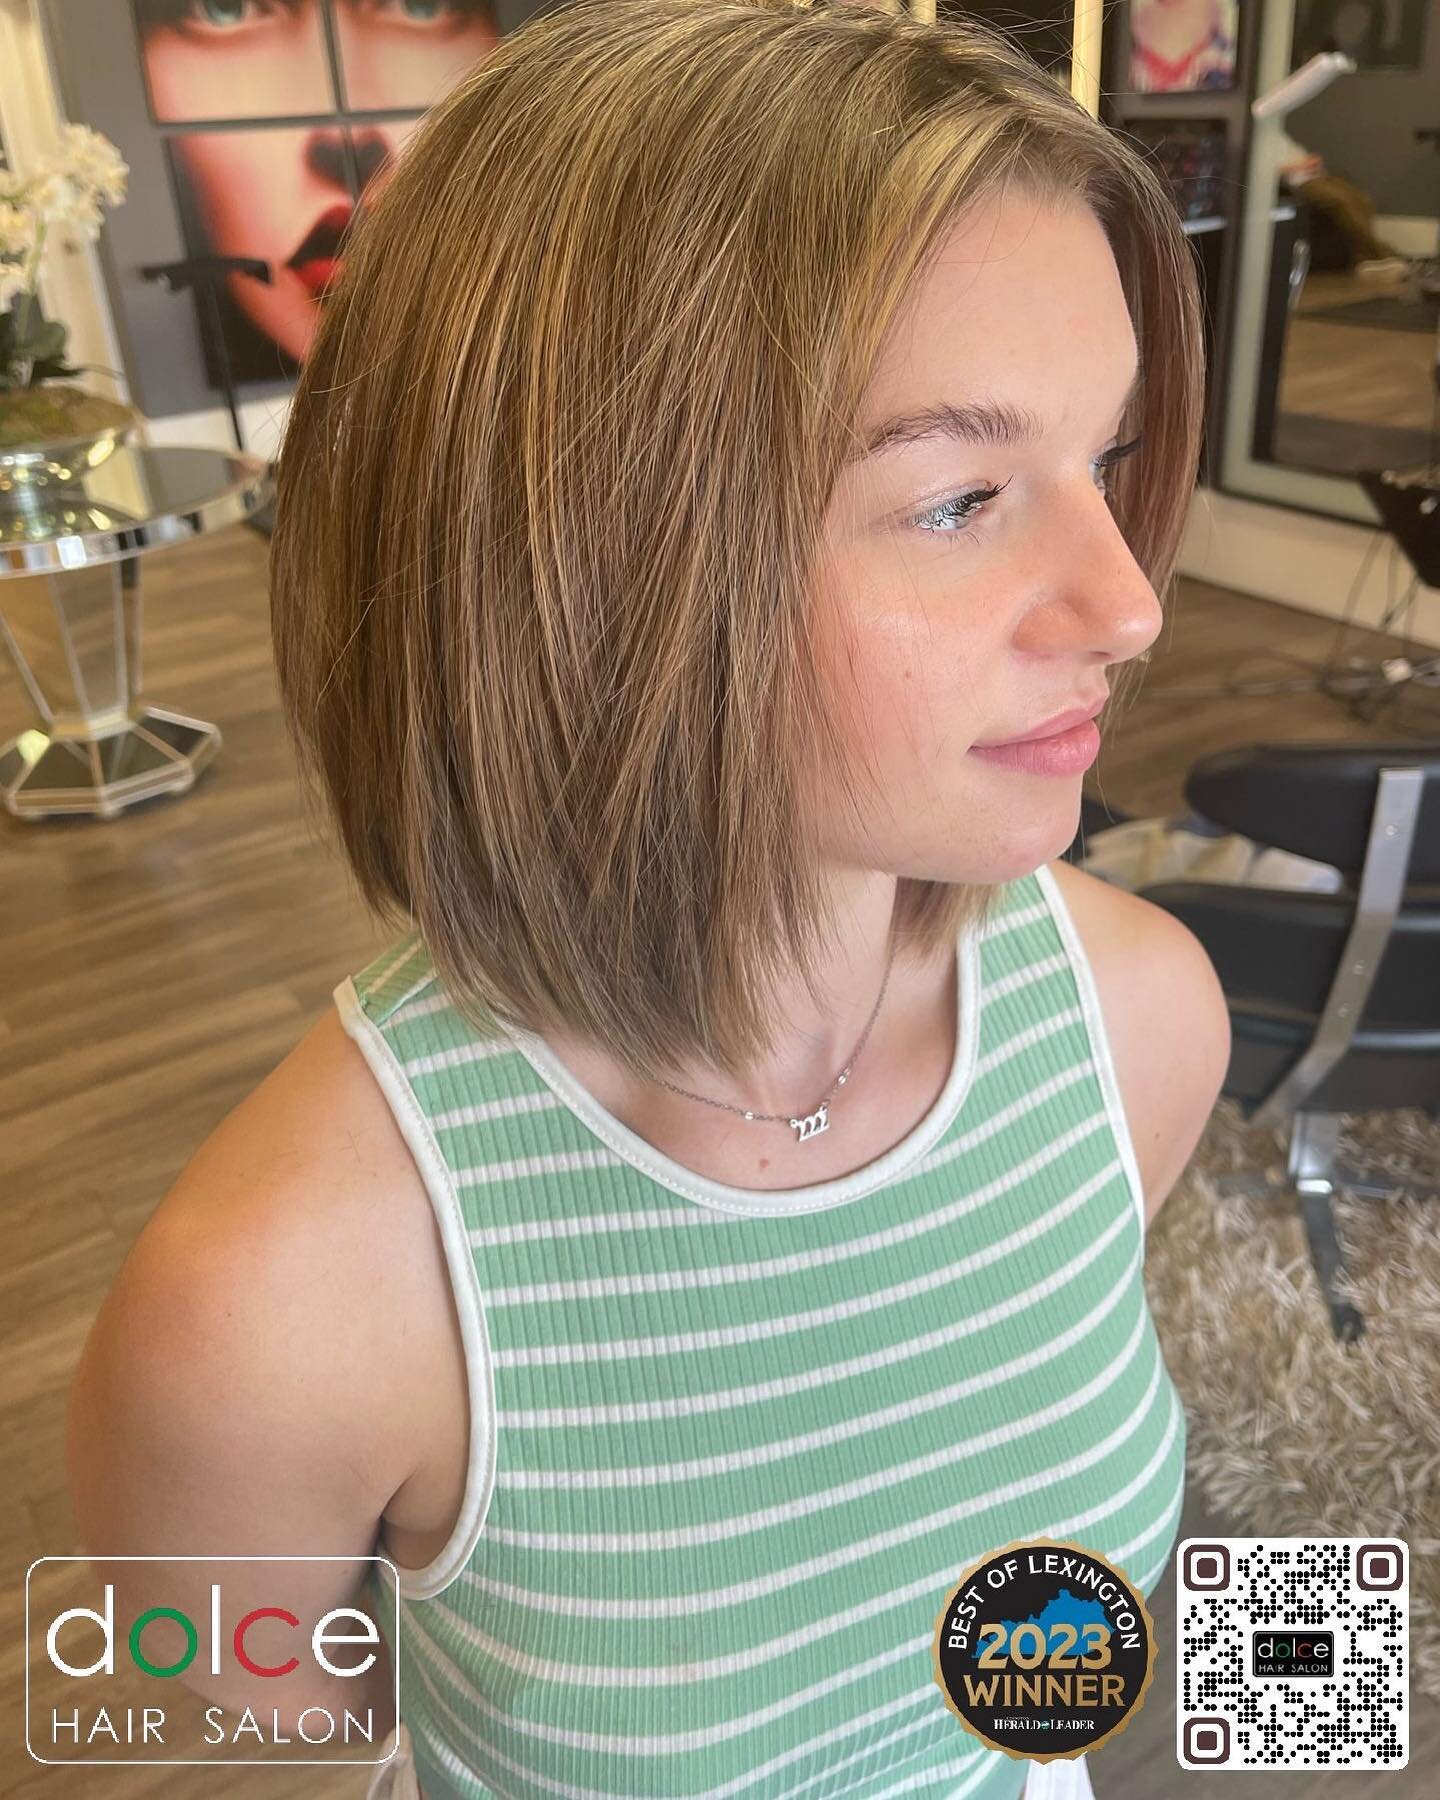 ✨ Discover the Elegance of Perfect Hair Color in Lexington, KY! ✨

At Dolce Hair Salon, we take pride in being your ultimate destination for flawless hair color transformations. Our expert stylists, equipped with the latest techniques and premium pro